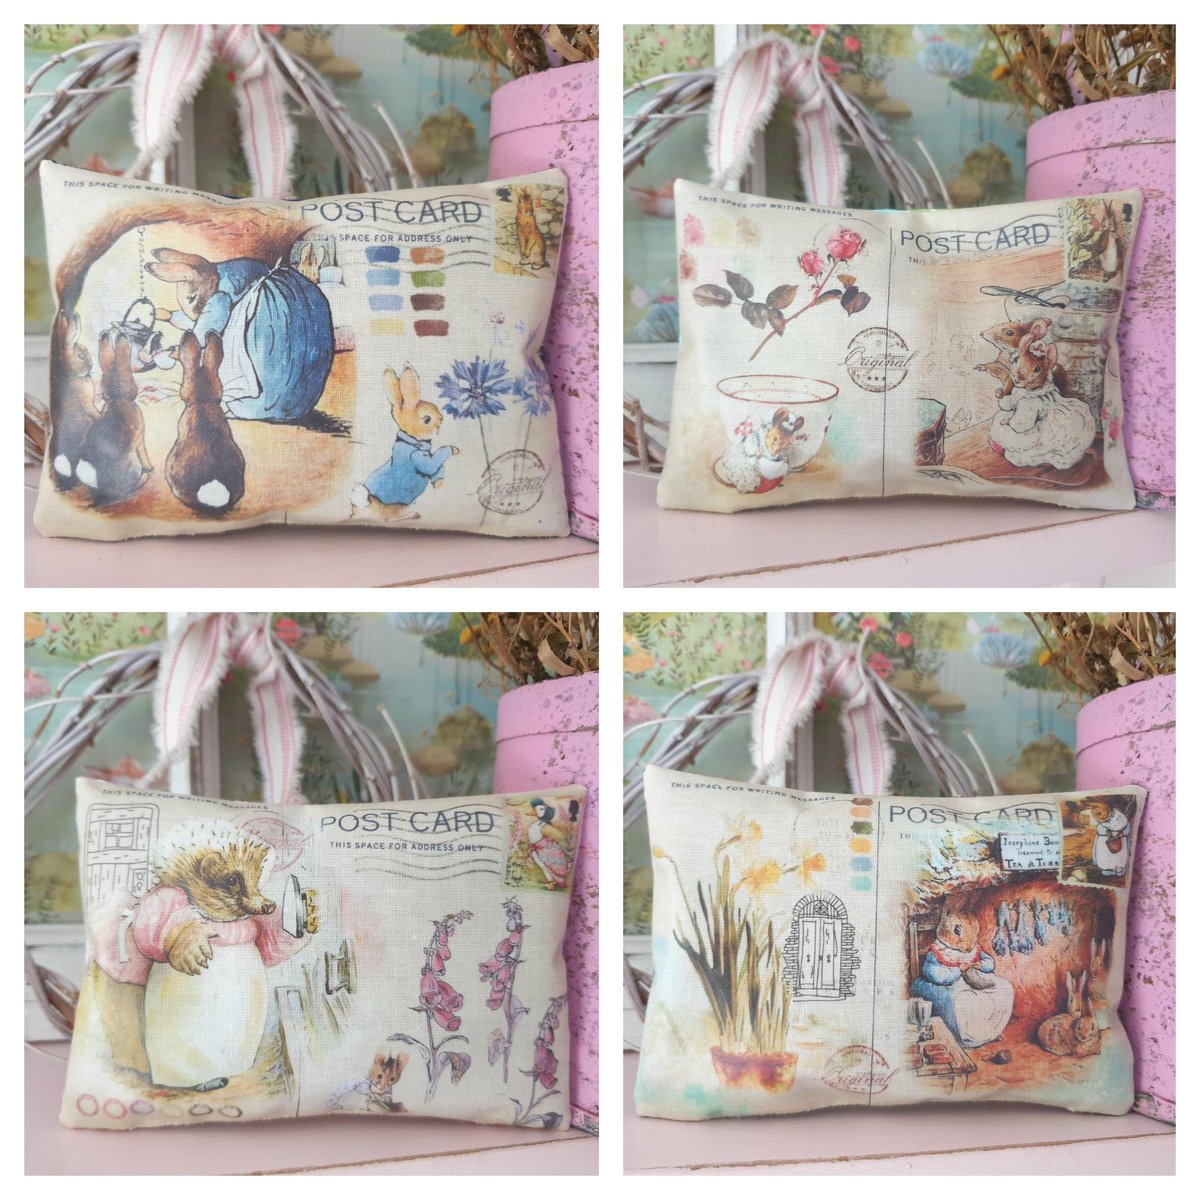 Evening #womaninbizhour - I made these adorable Beatrix Potter sachets this morning. 4 designs and scented with lavender or rose petals. Don't forget Etsy are giving you £5 off a total spend of £30 until Tuesday! Use the code SMALL5 #craftbizparty sarahbenning.etsy.com/listing/172138…